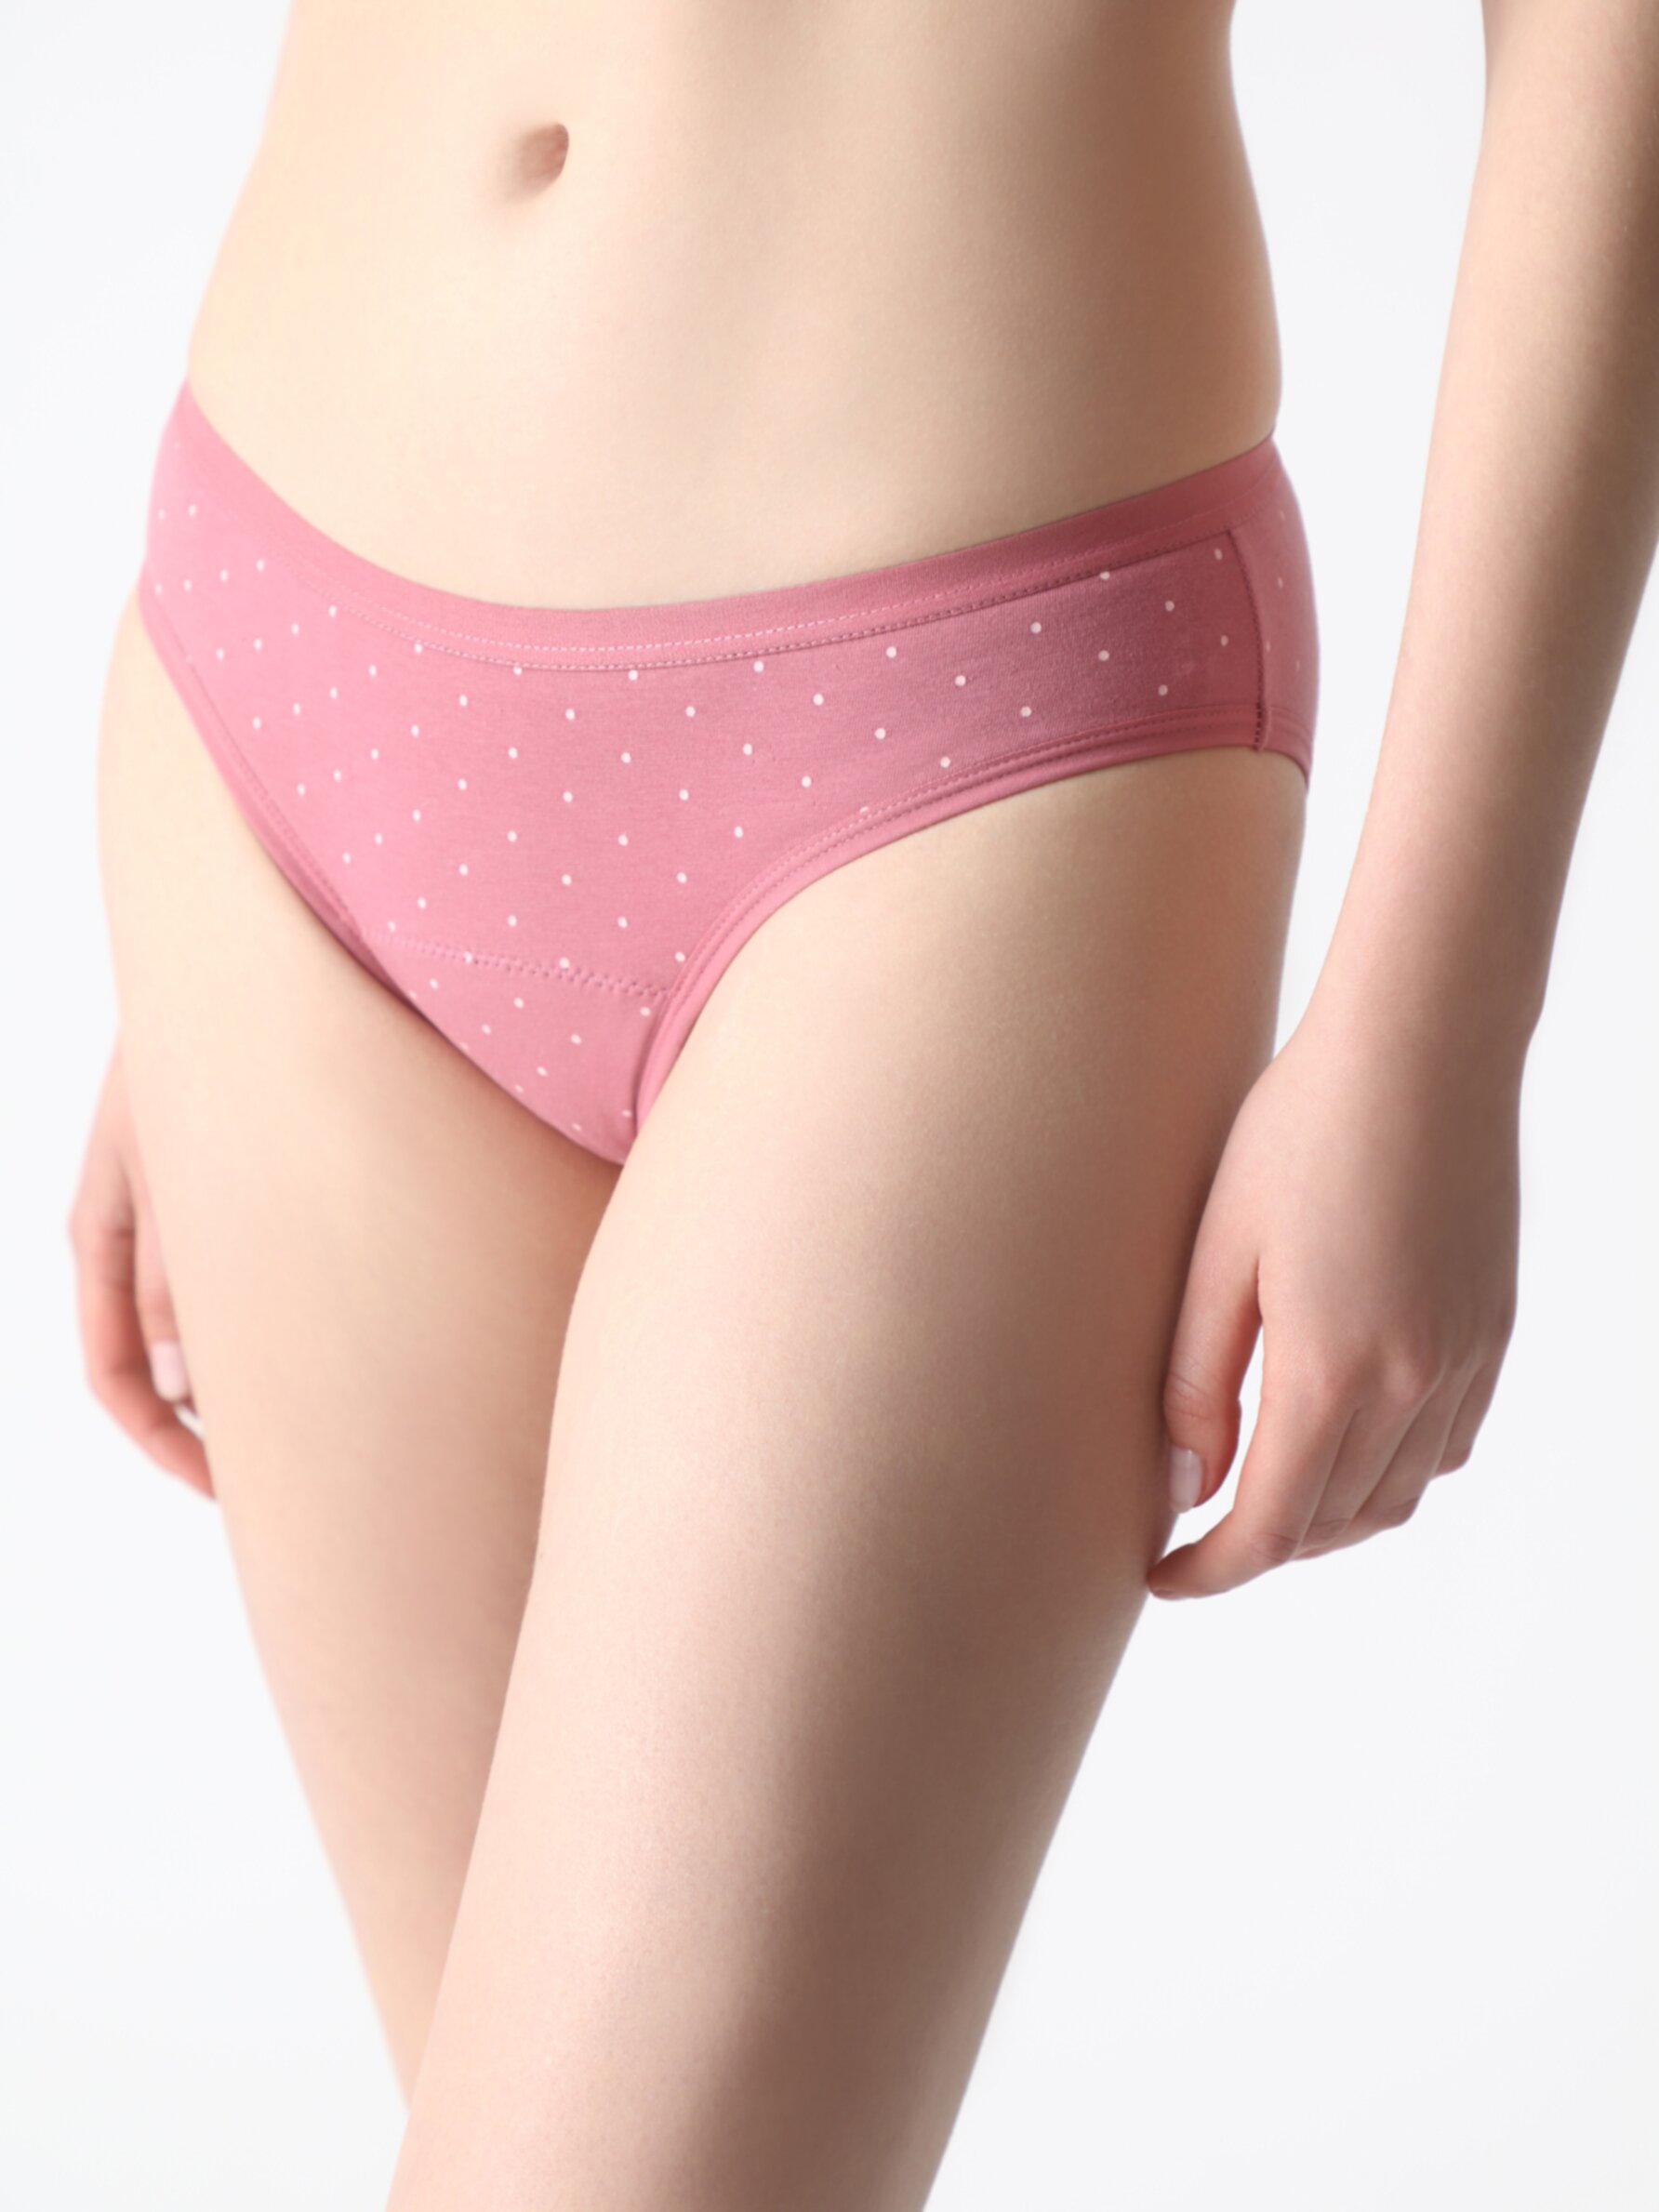 Pack of 2 cotton period knickers - Briefs - Underwear - CLOTHING - Woman 